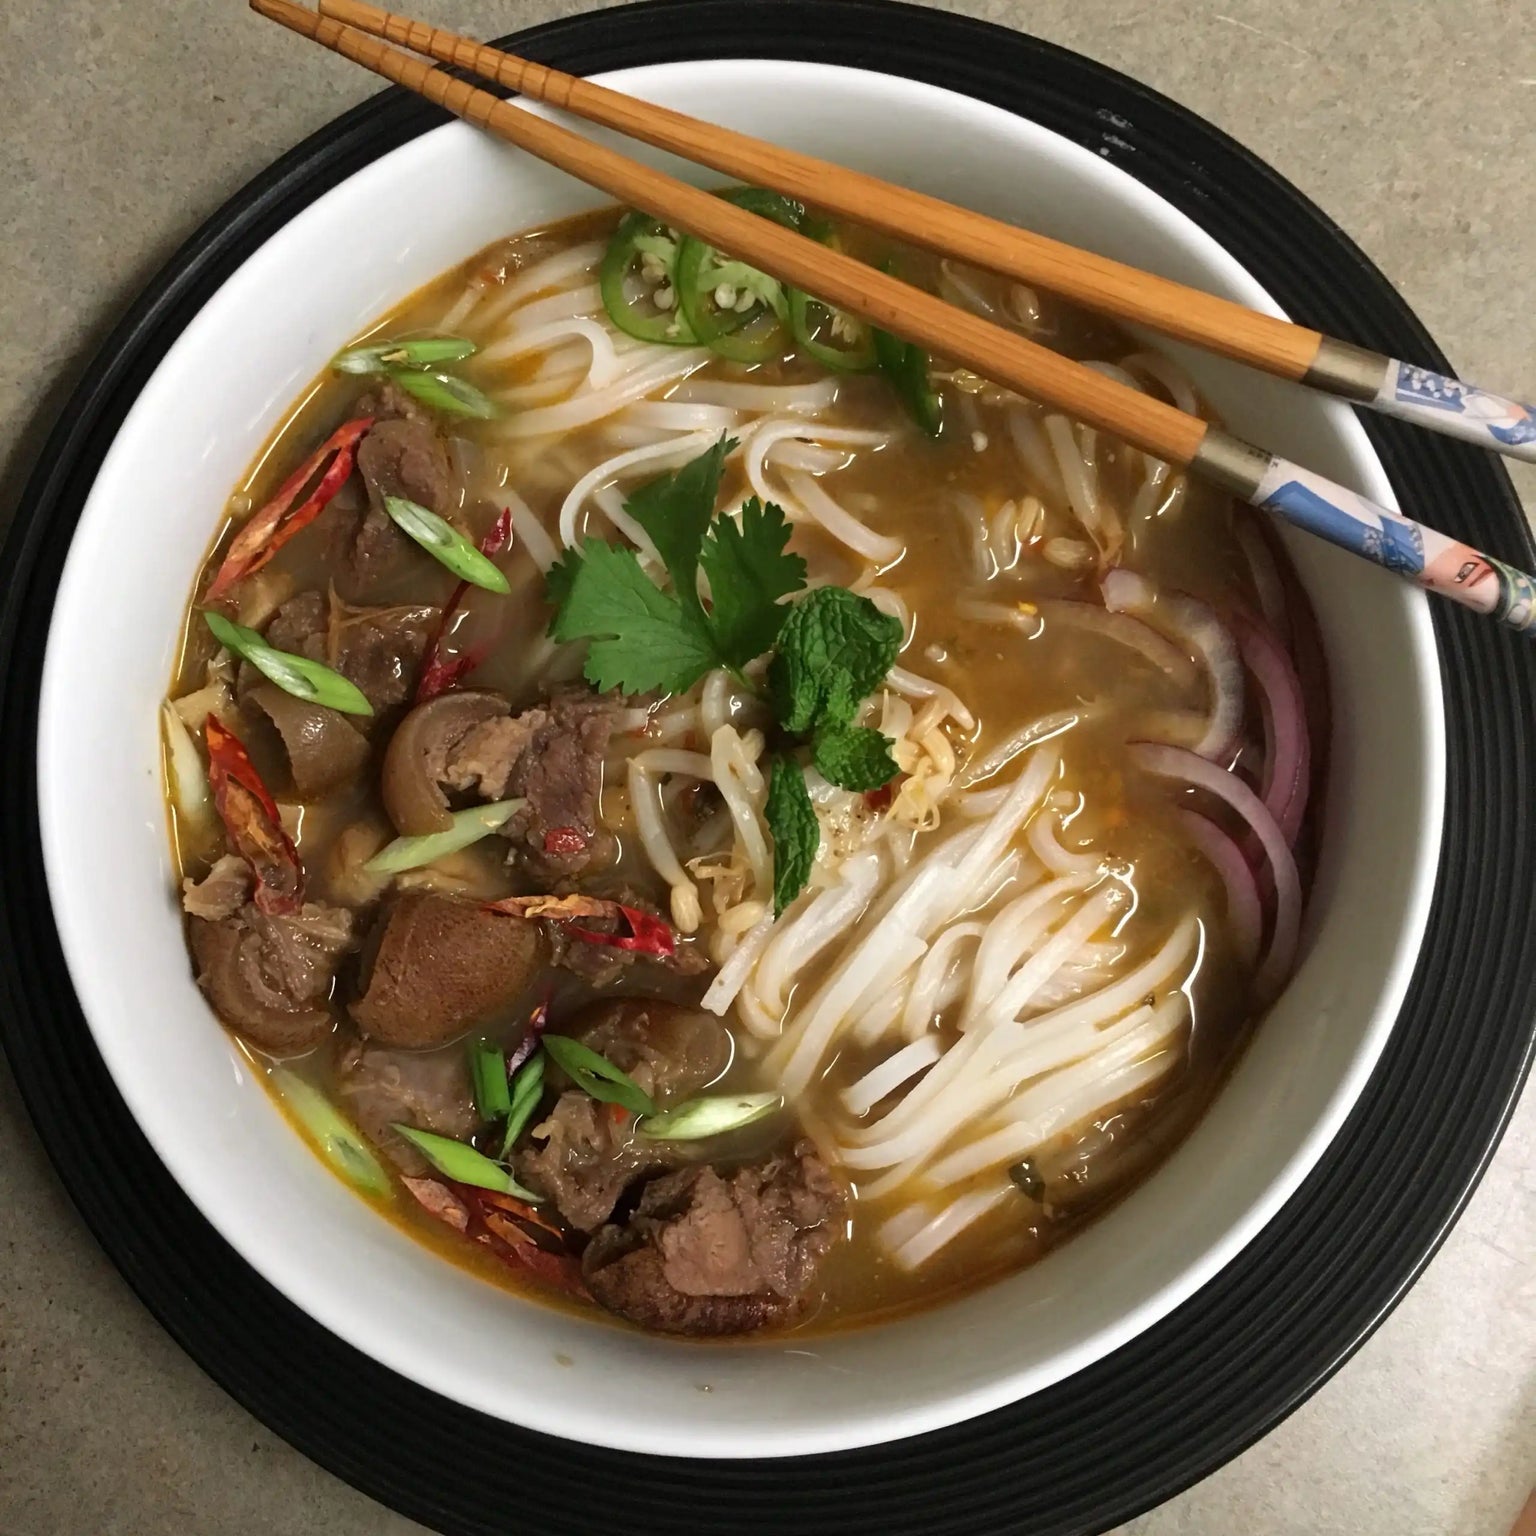 The Goat Meat Pepper-Soup Pho